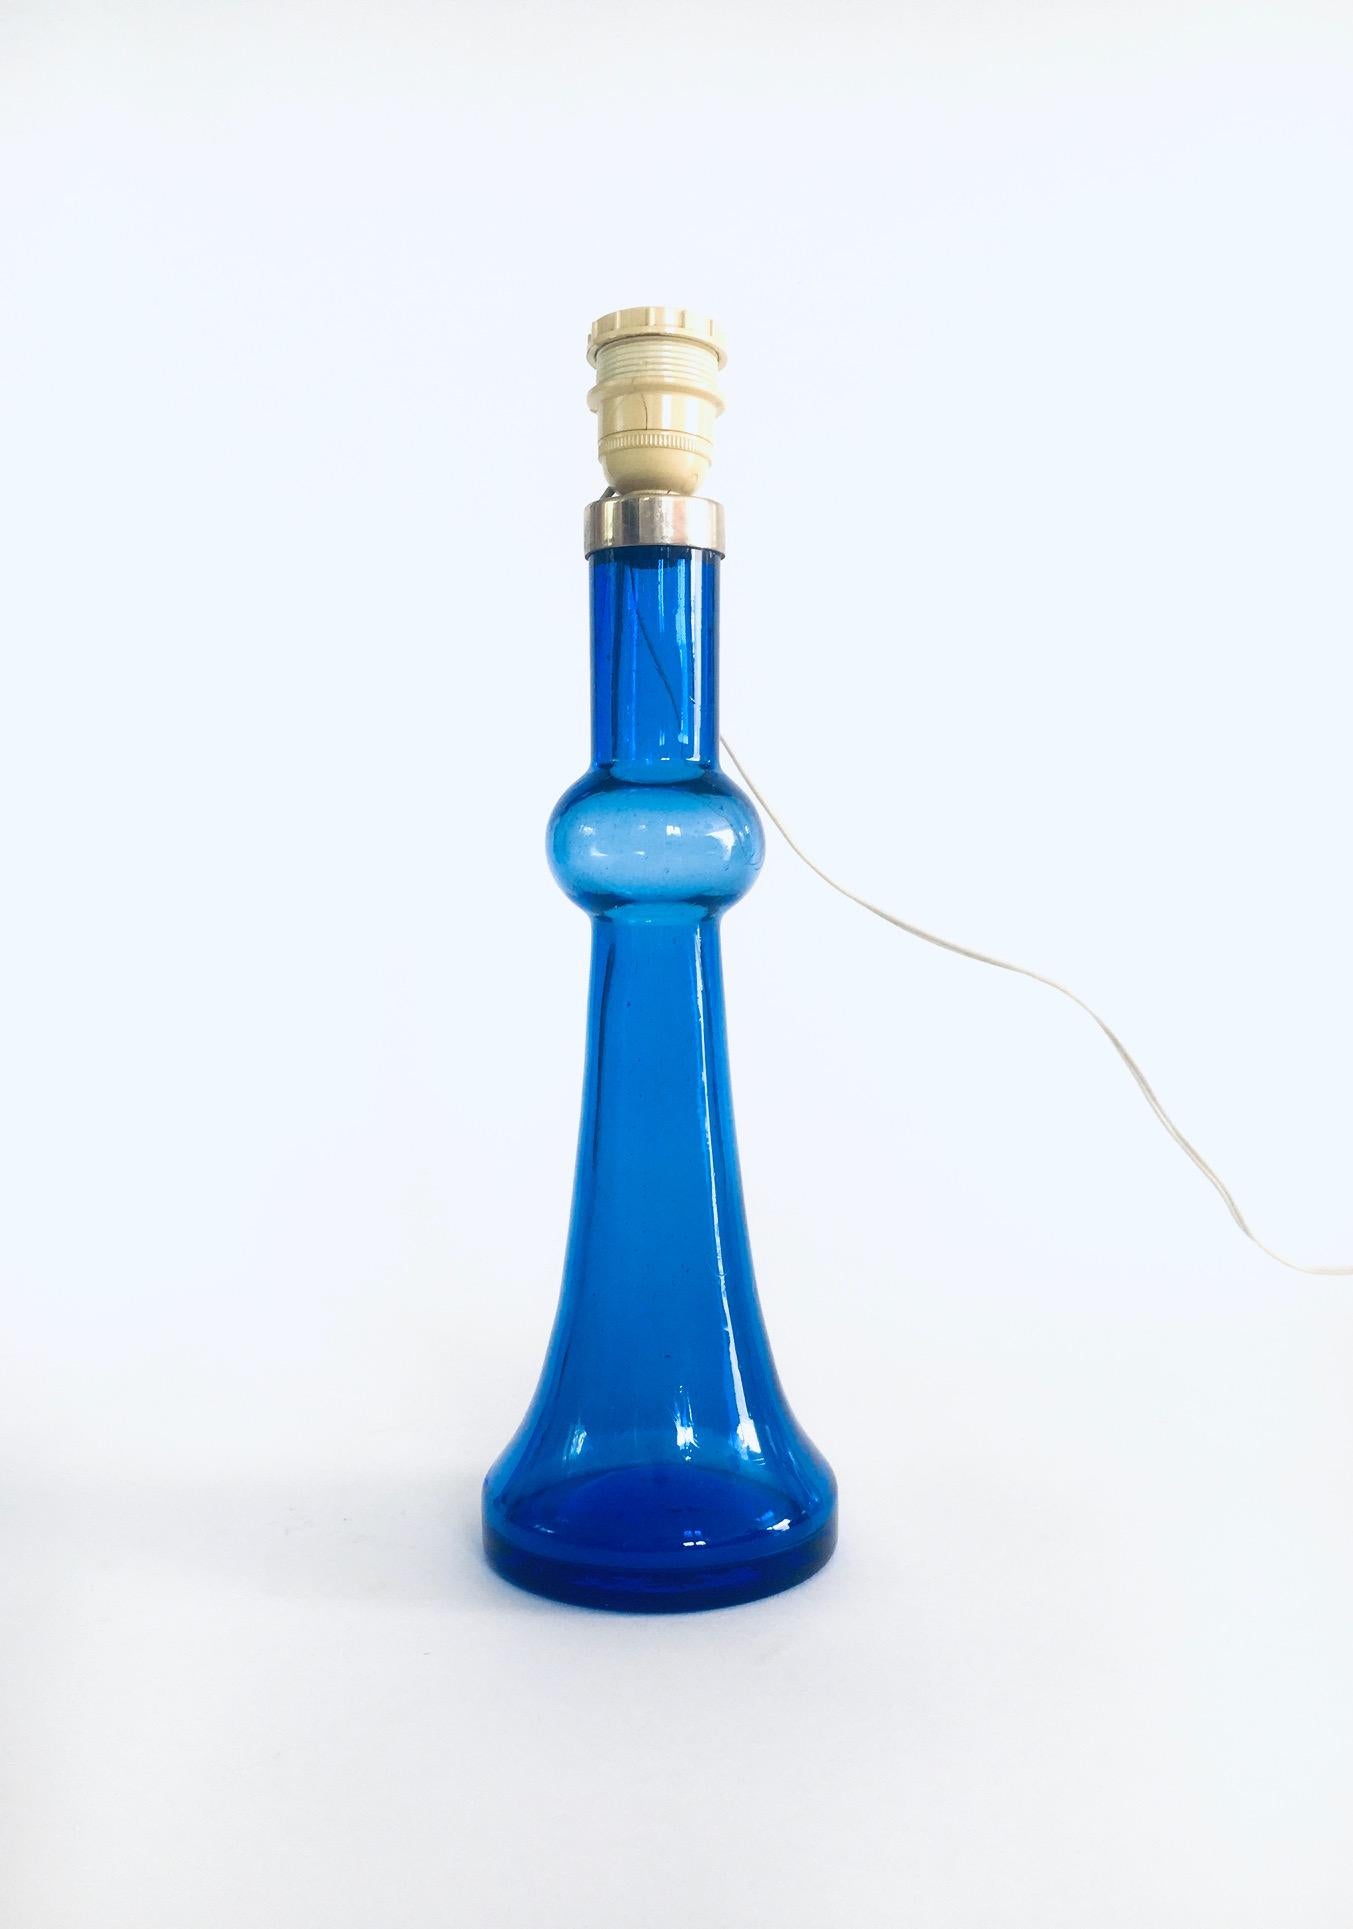 Mid-Century Modern Midcentury Design Blue Glass Table Lamp by Nanny Still for Raak, 1960's For Sale